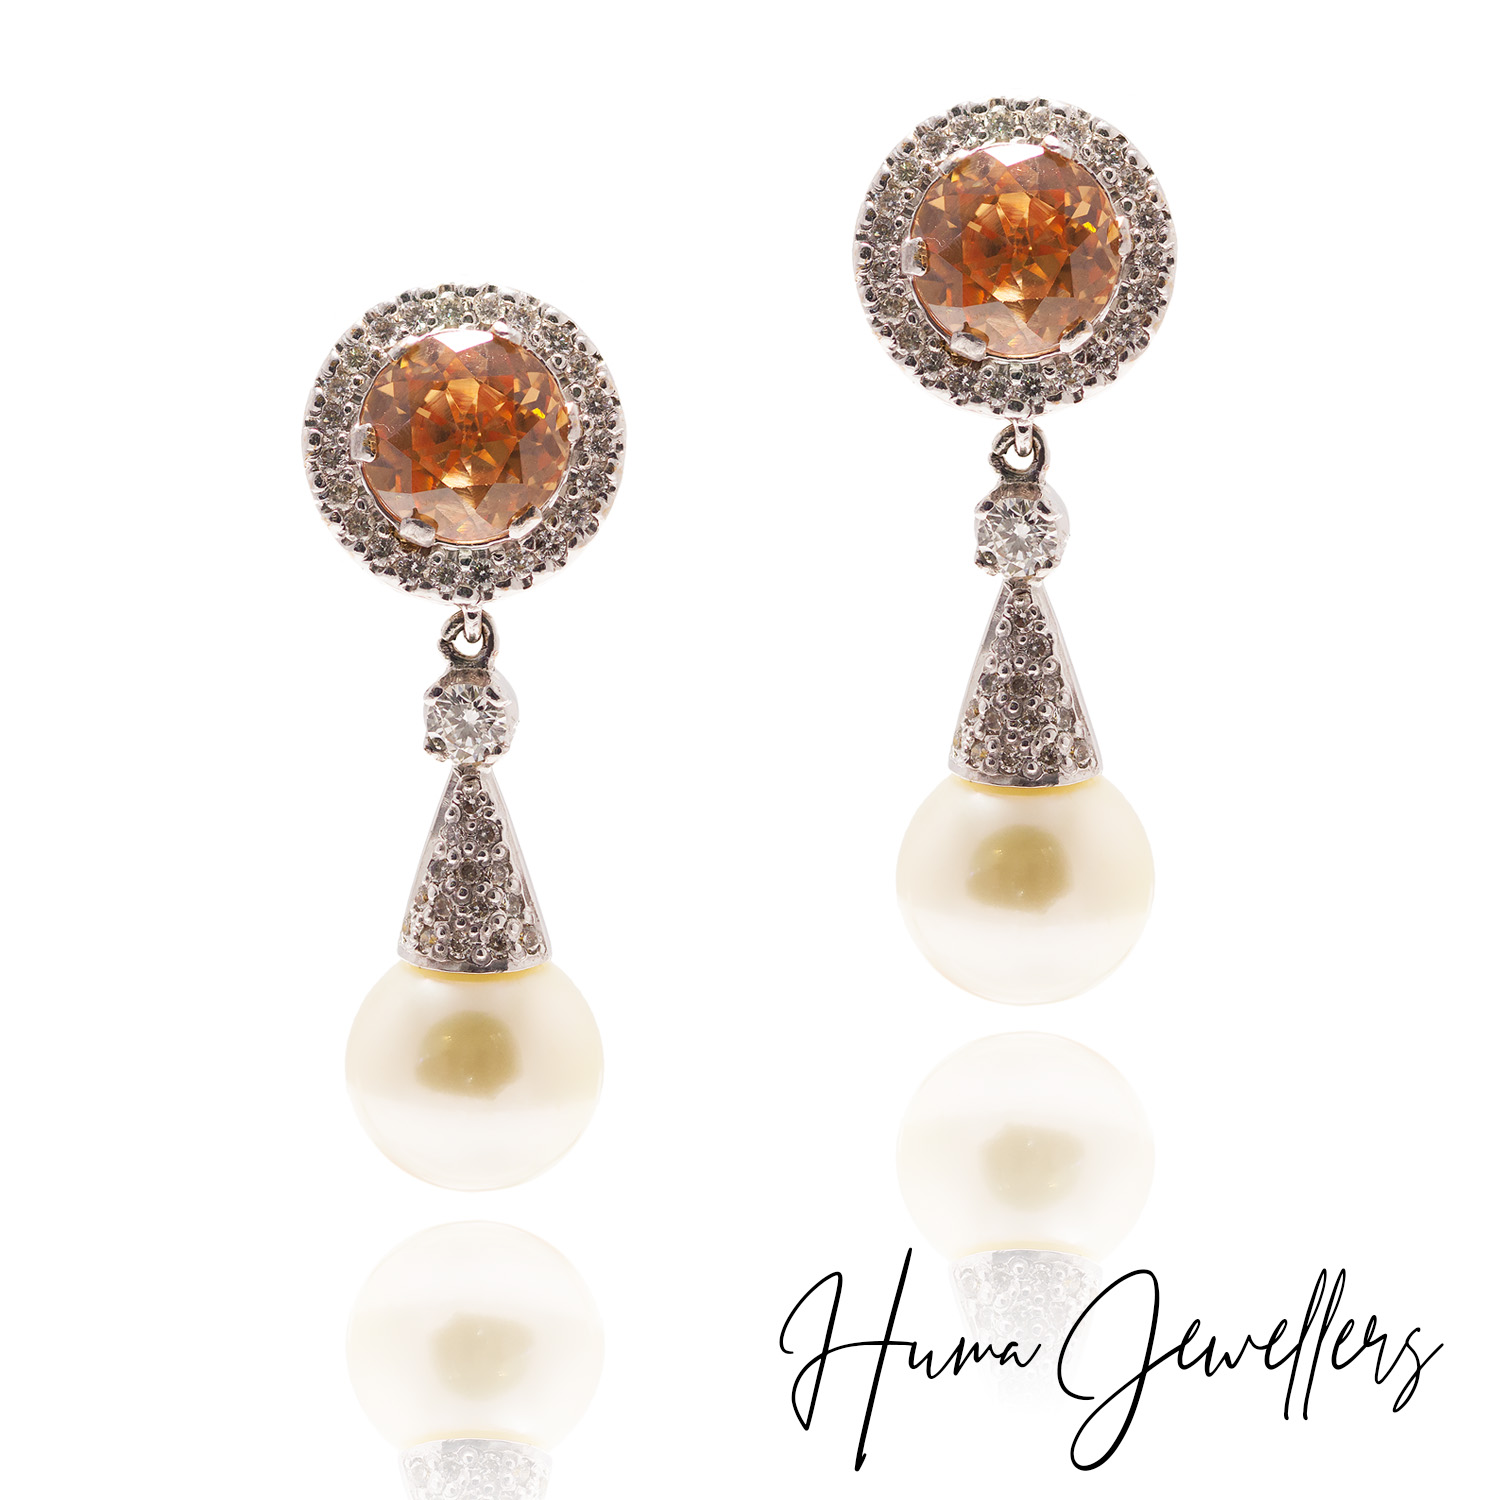 classic diamond earring design with champagne stone and south sea pearls made in 21 karat gold by huma jewellers jewelry karachi pakistan